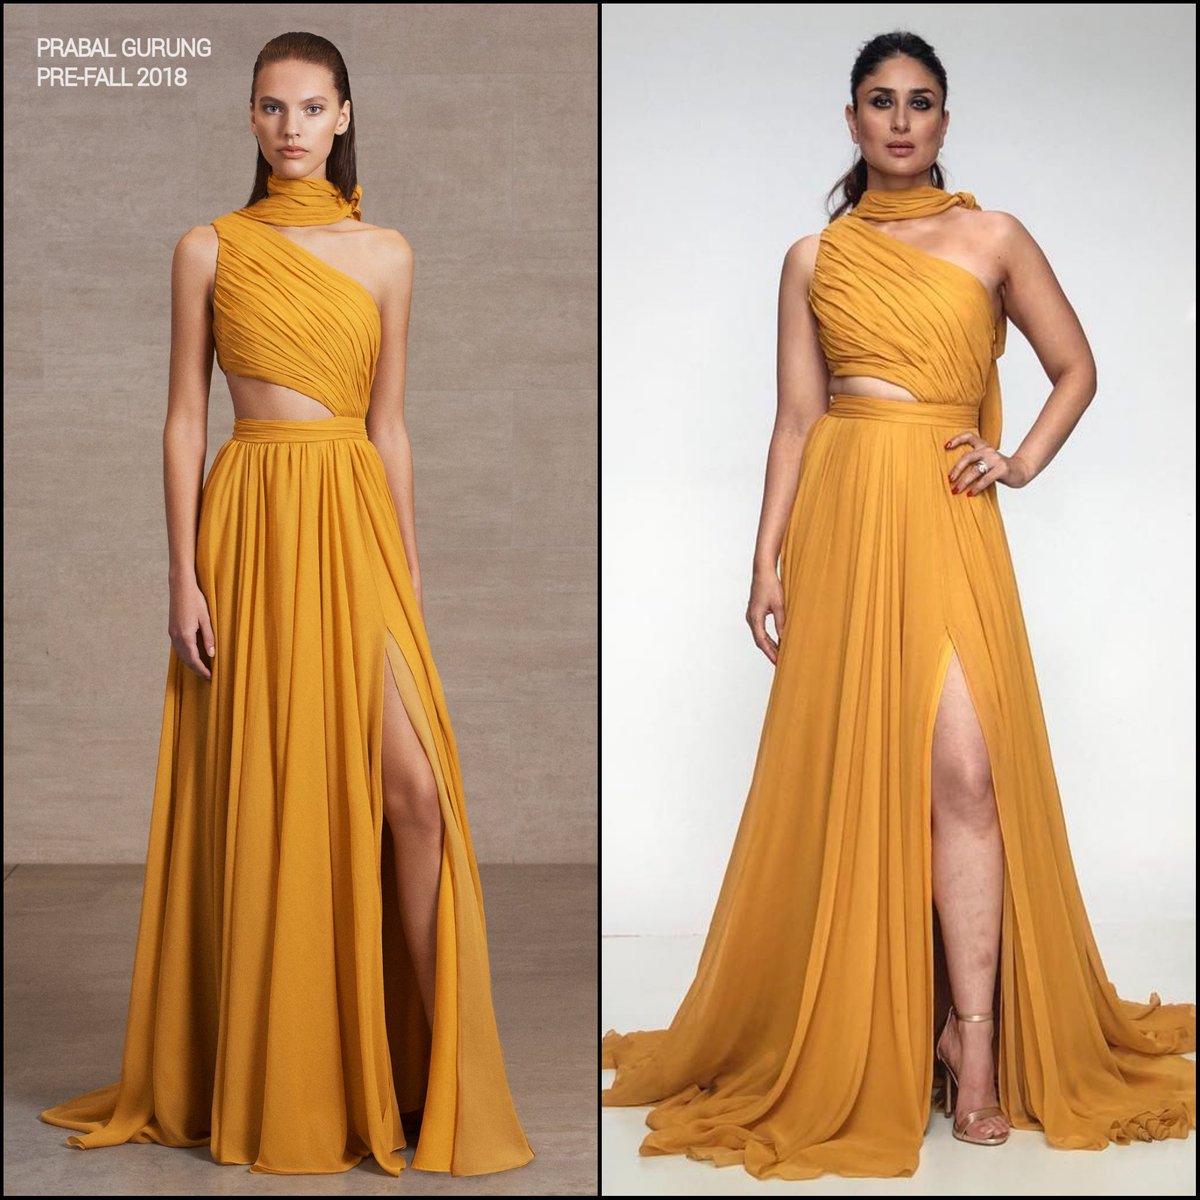 Party wear Indian Evening Gowns that are trending now! | Fashionworldhub